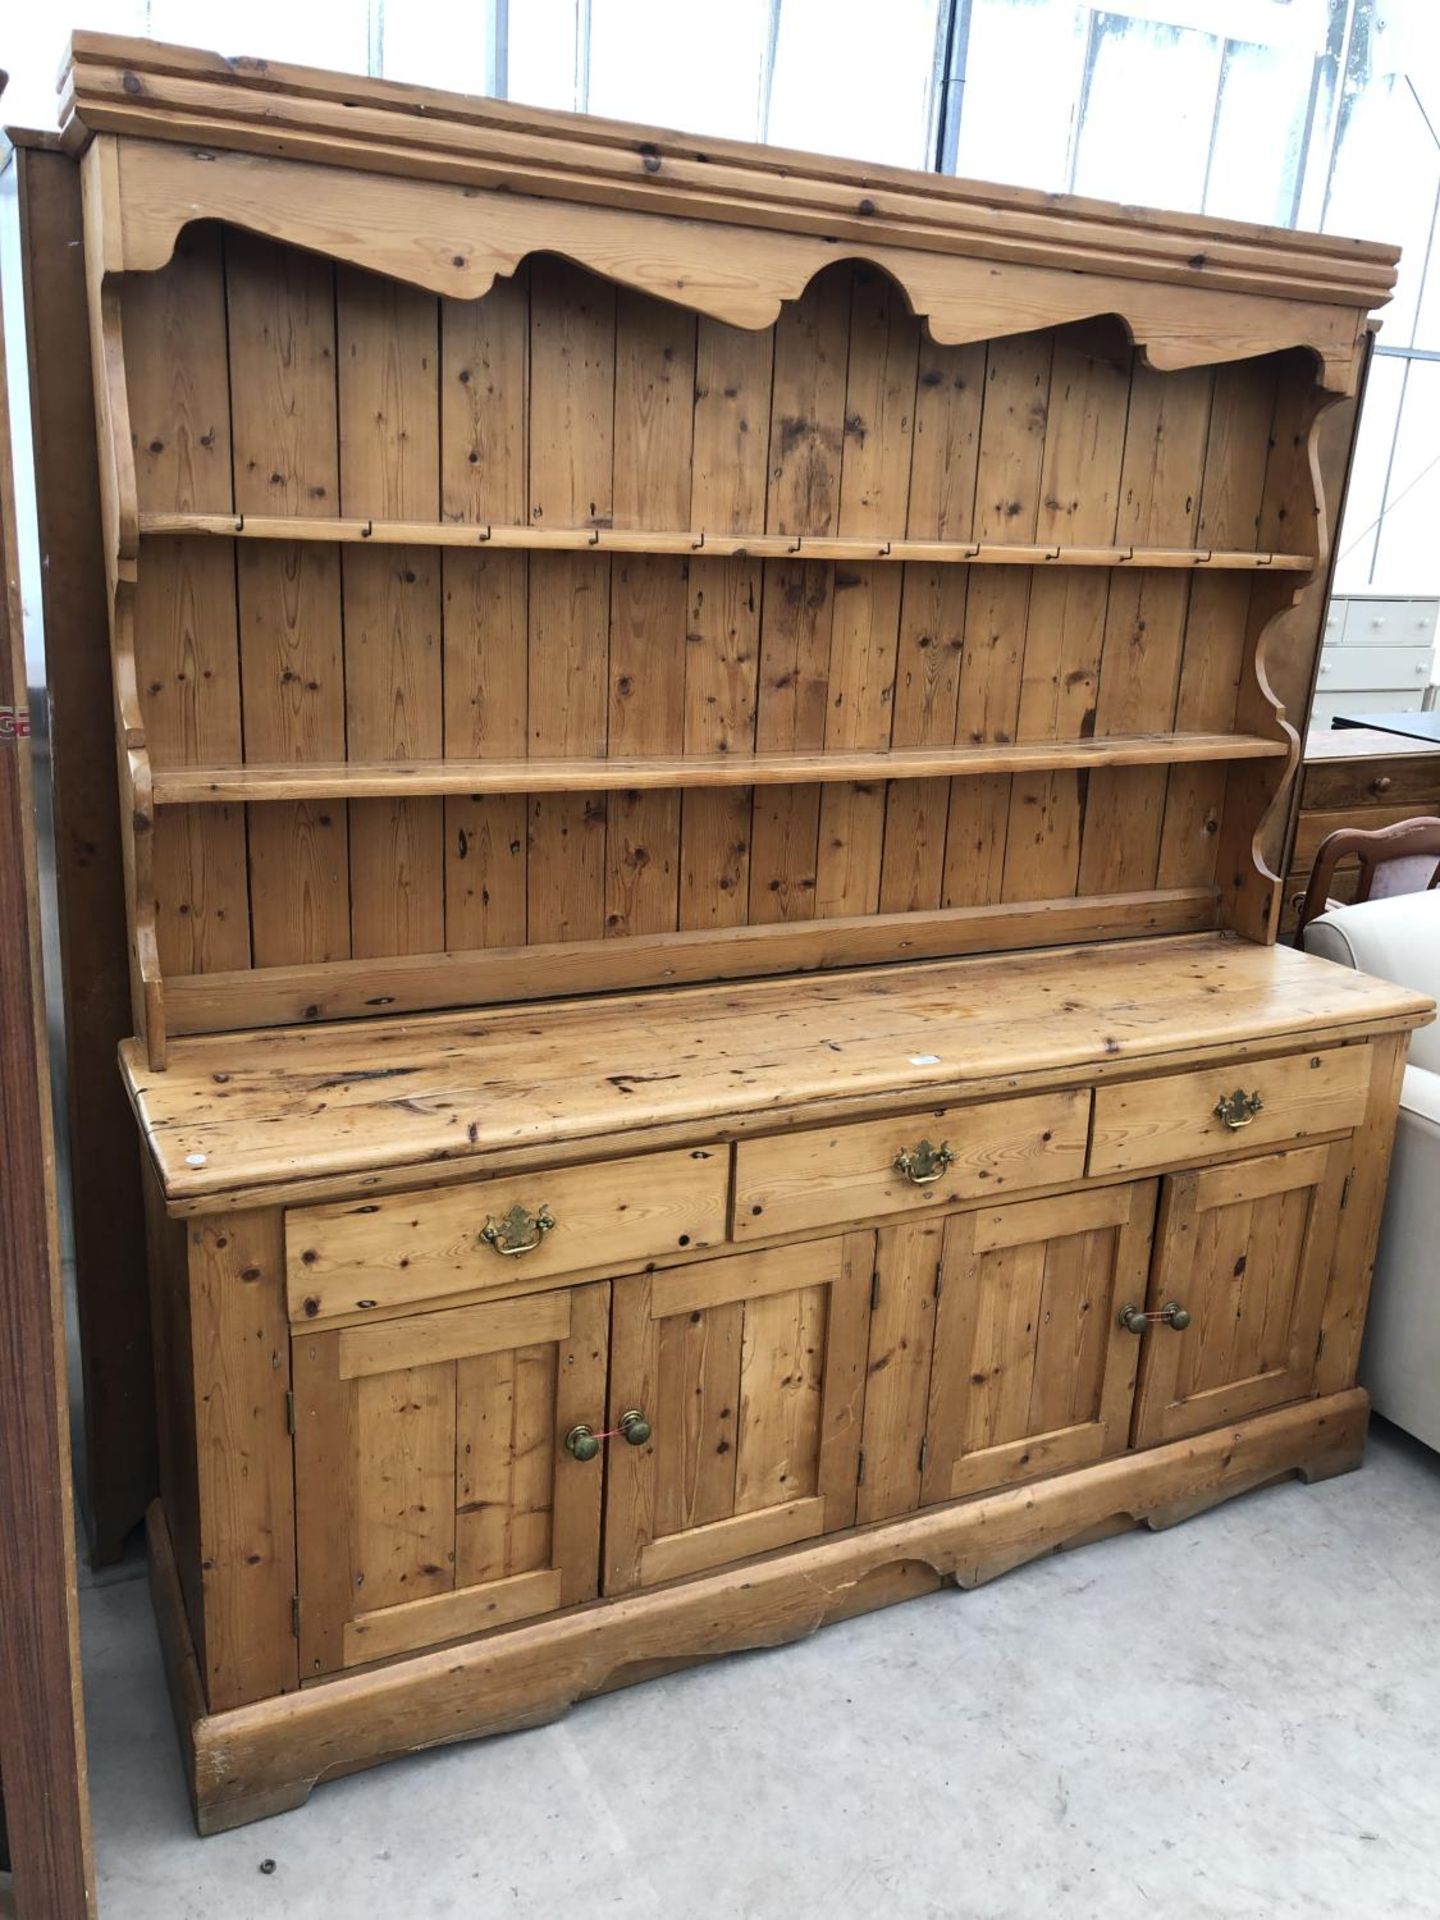 A LARGE PINE FARMHOUSE DRESSER WITH UPPER PLATE RACK AND LOWER DOORS AND DRAWERS